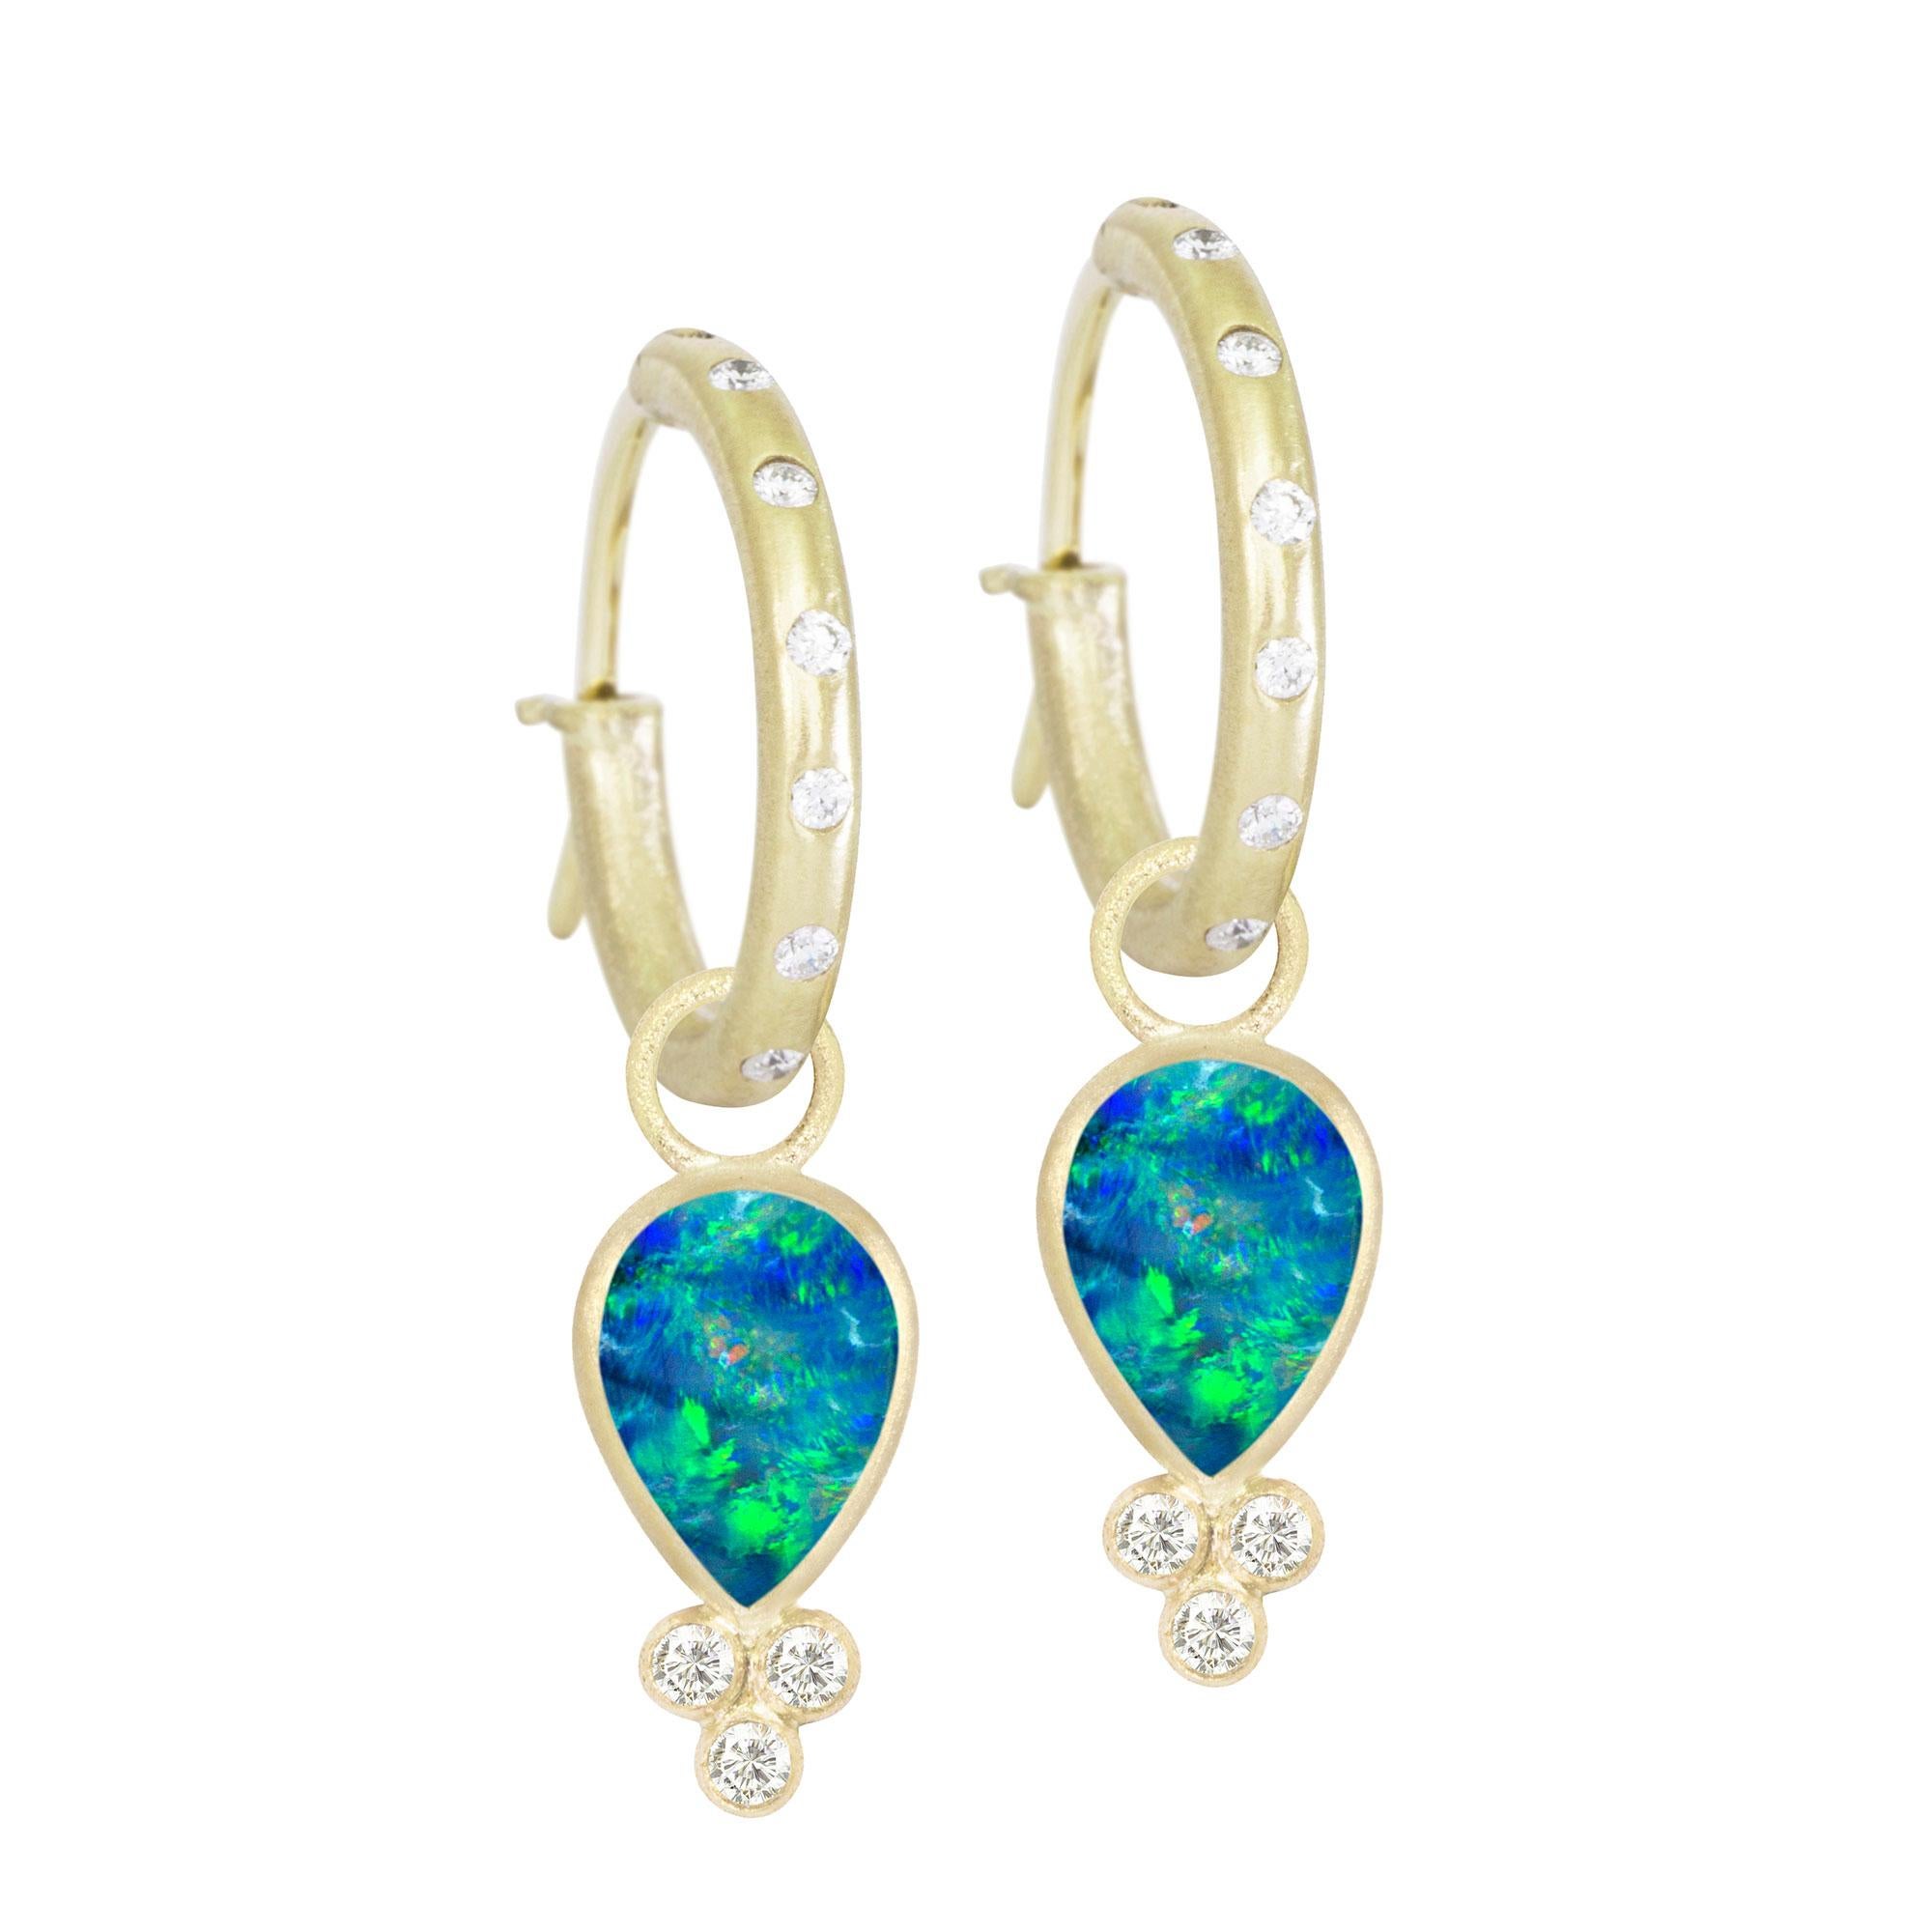 Designed with bezel-set opal stones, the diamond-accented Lilly Gold Charms embrace the shape of a drop of water—an essential element for life—and bring a little edge to any of our hoop styles.
Nina Nguyen Design's patent-pending earrings have an